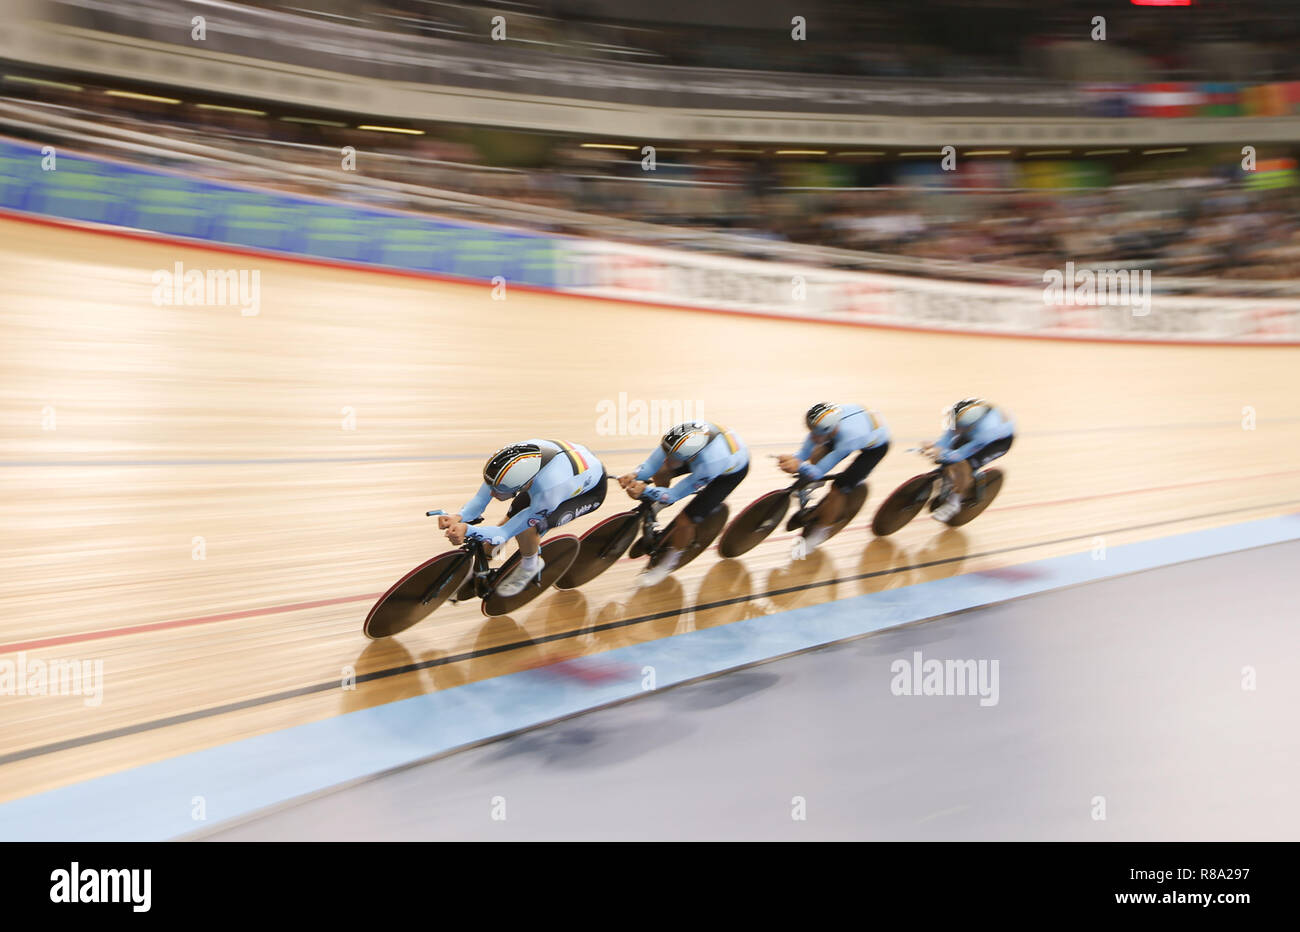 Lindsay de Vylder, Kenny de Ketele, Robbe Ghys and Fabio van den Bossche of Belgium during the Mens Team Pursuit First Round during day one of the Tissot UCI Track Cycling World Cup at Lee Valley VeloPark, London. Stock Photo